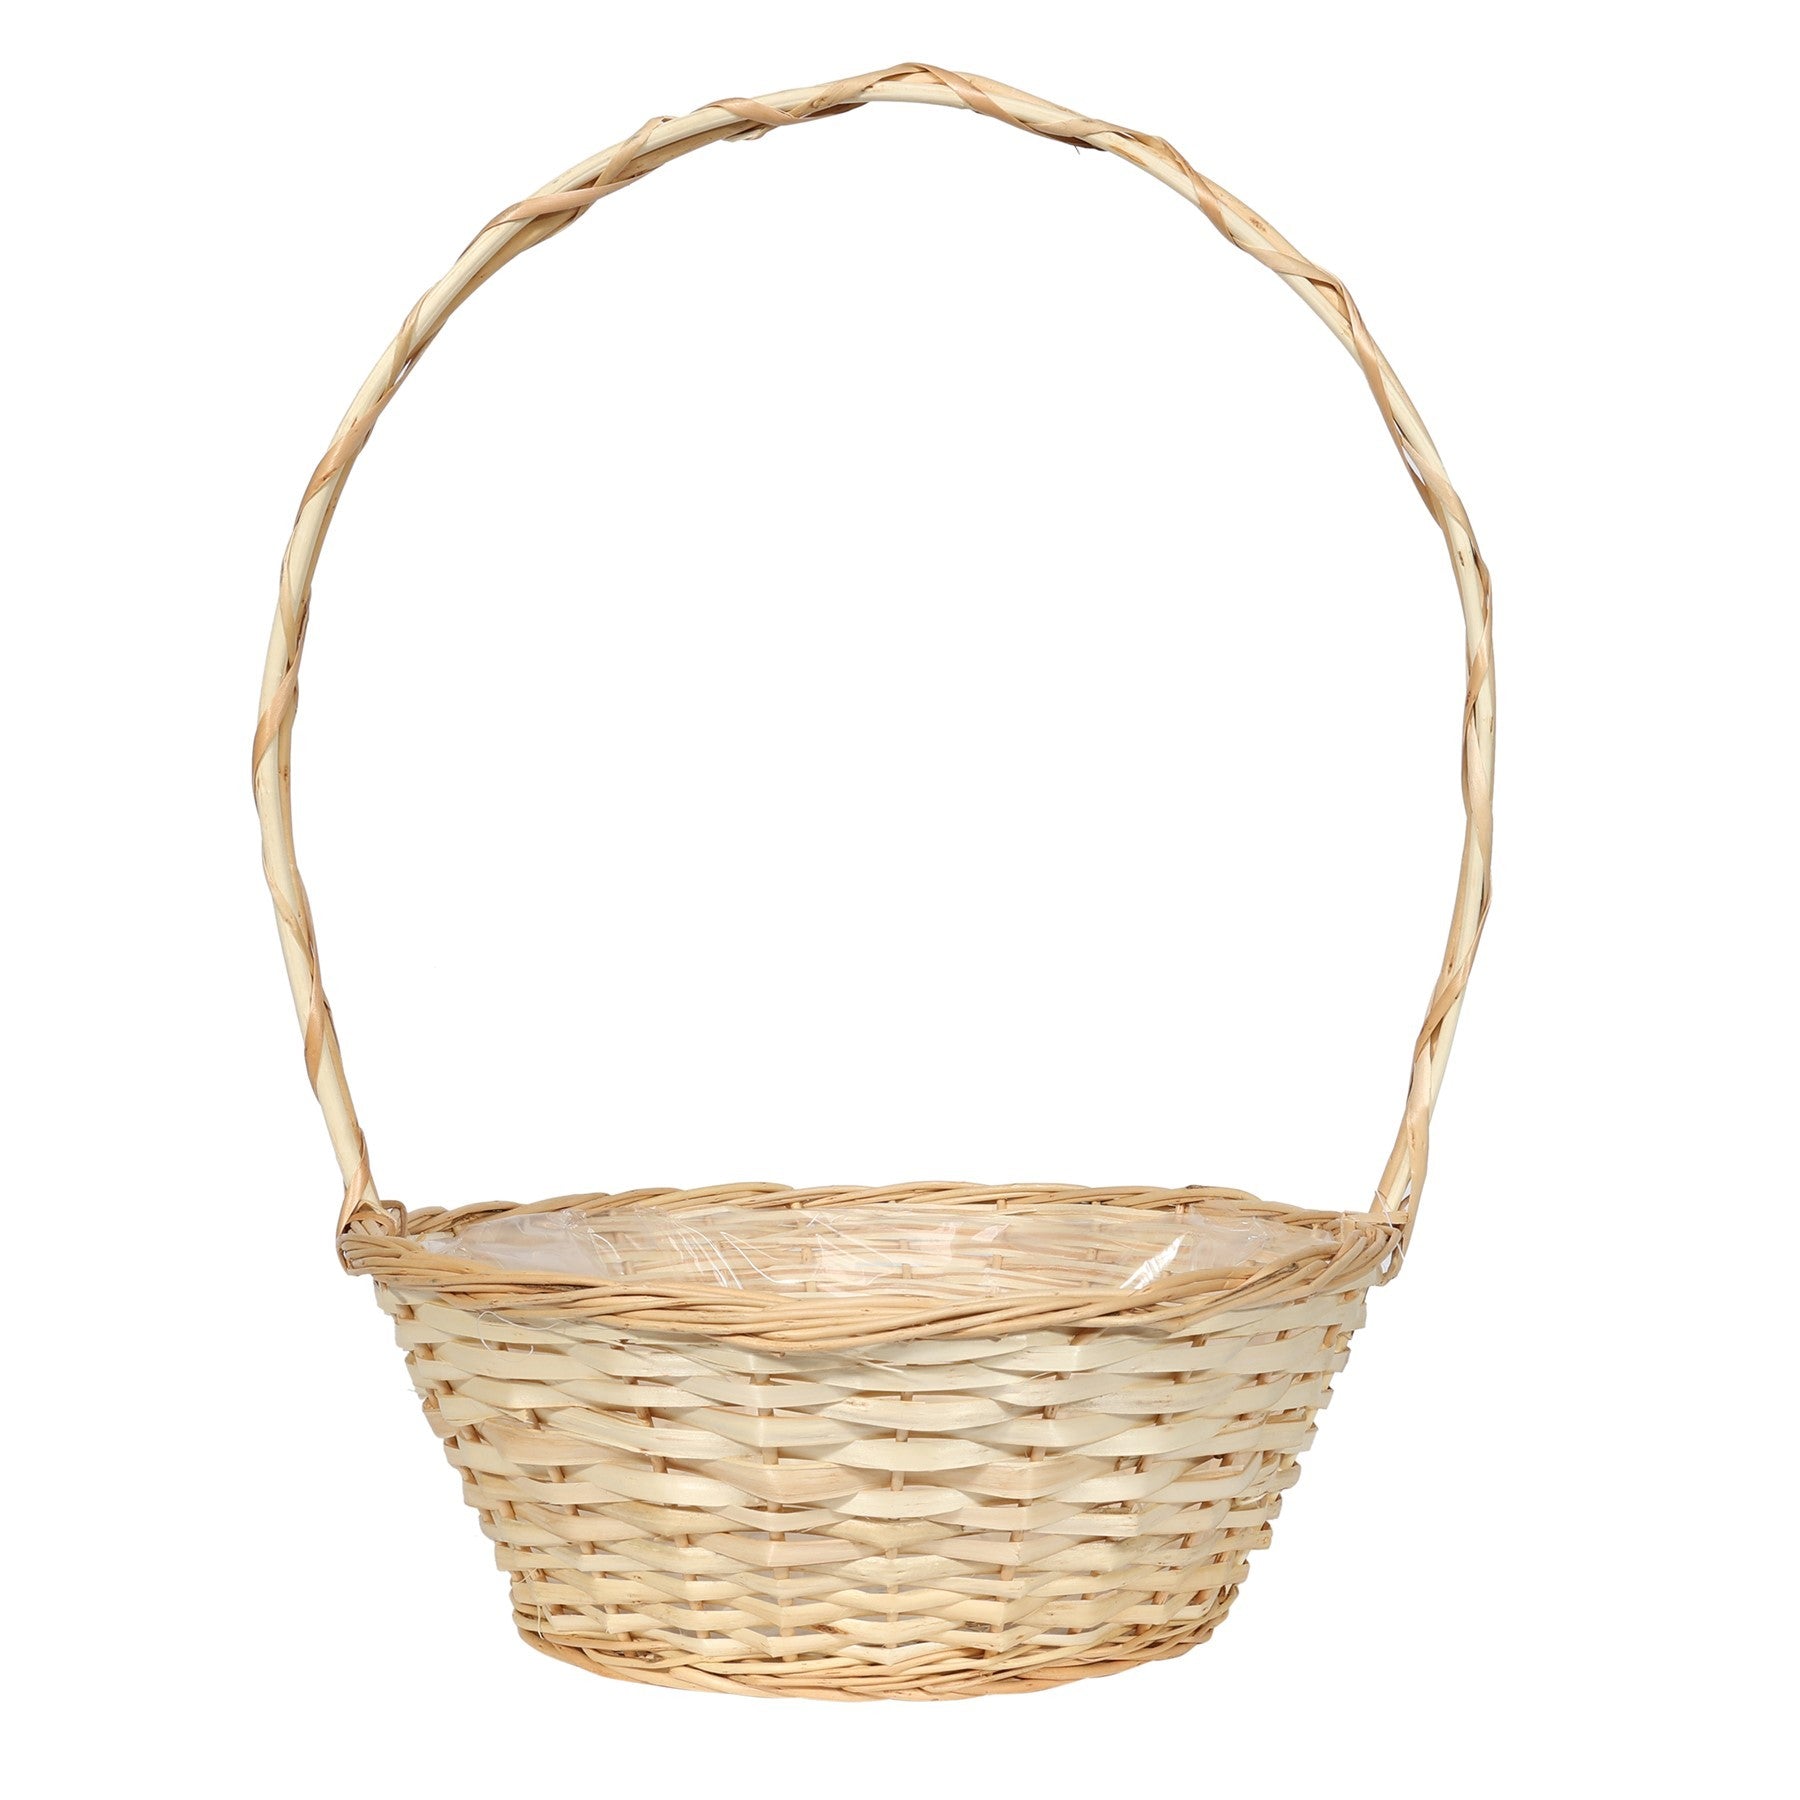 View Florida Basket with Handle 14inch information